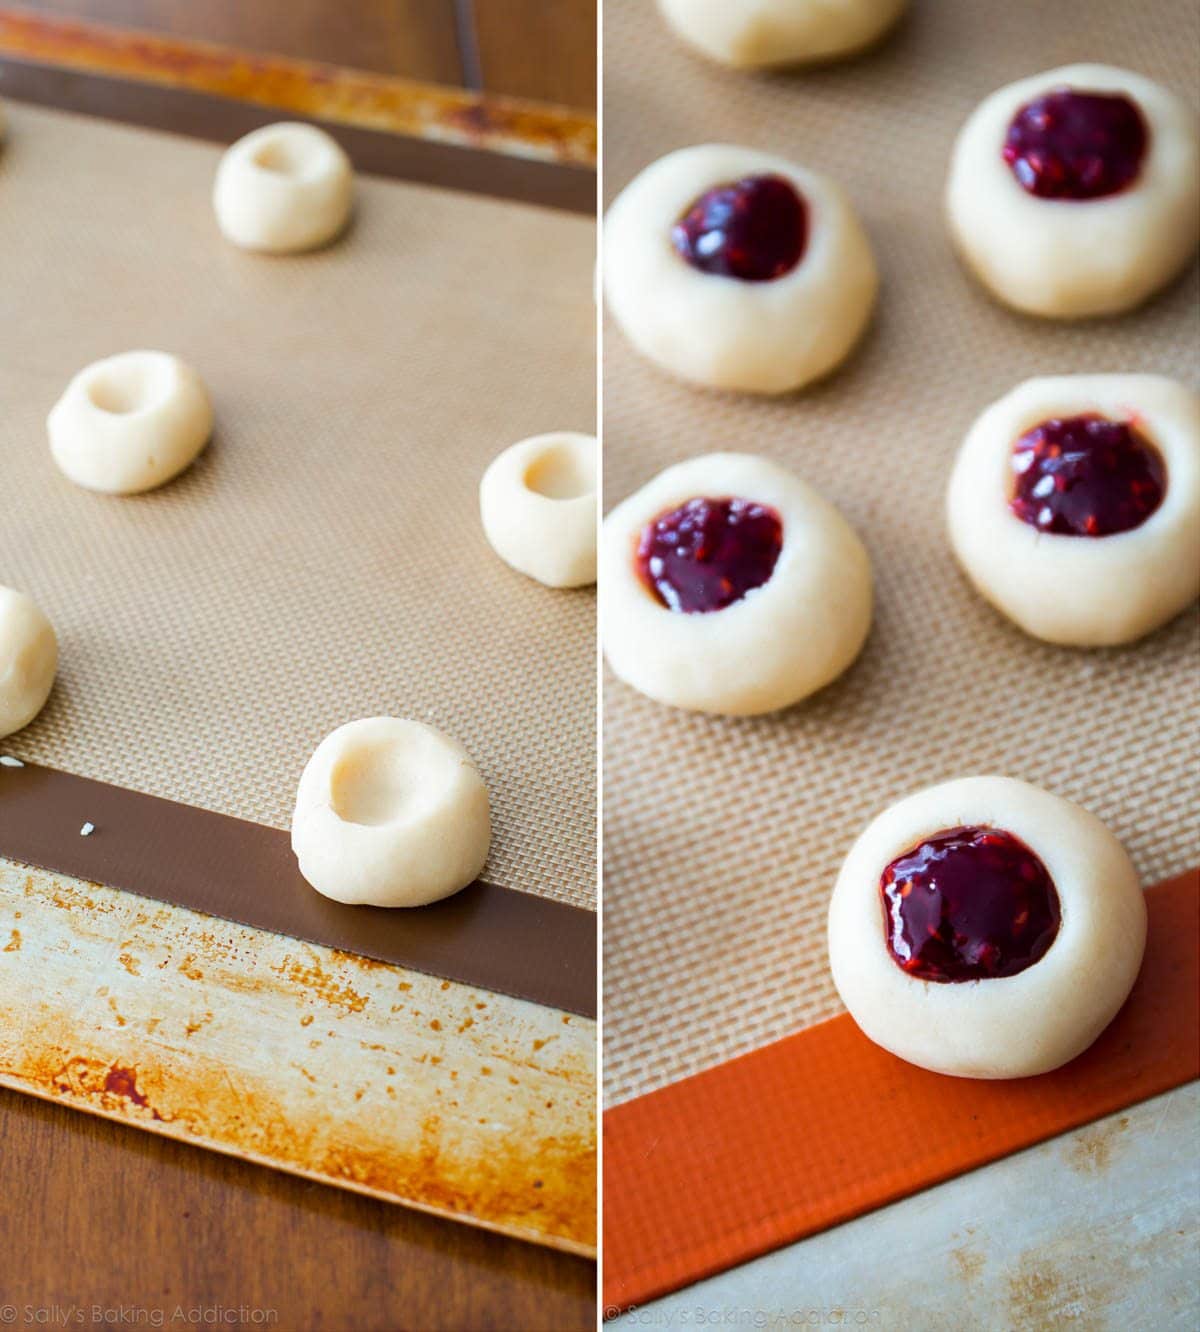 2 images of shortbread cookie dough with indents for filling and cookies filled with raspberry jam